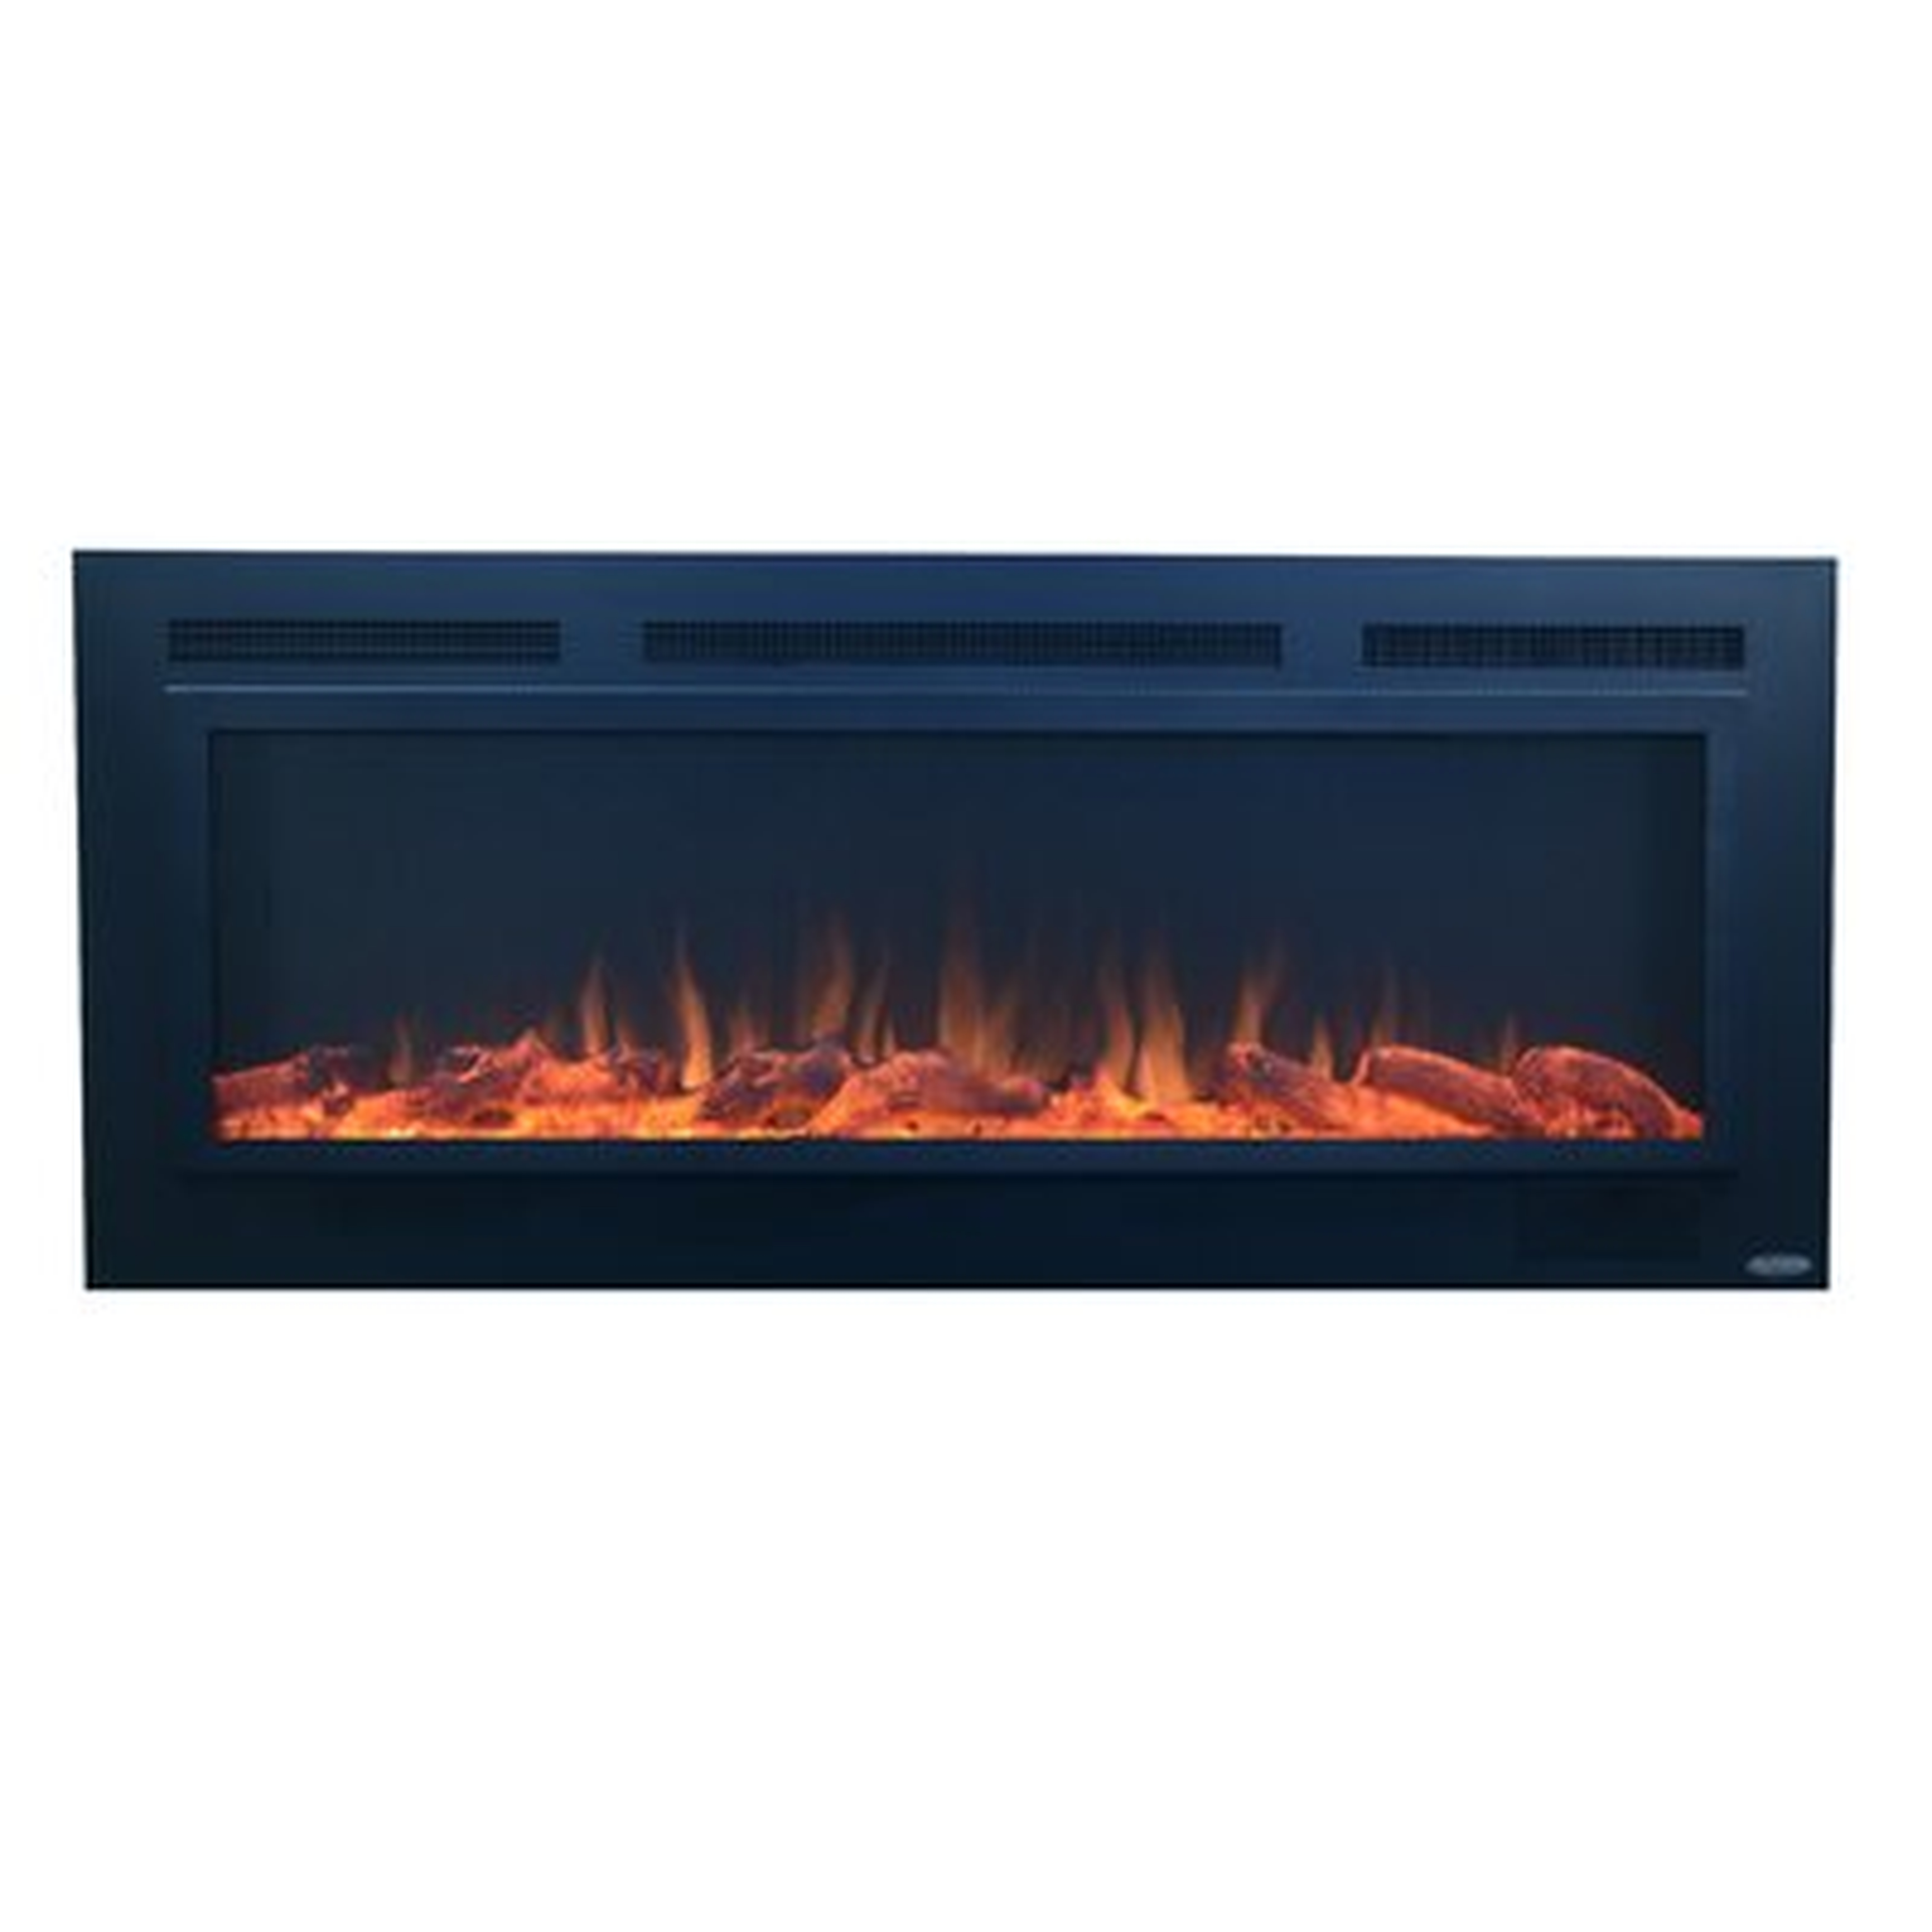 Mosteller Steel Recessed Wall Mounted Electric Fireplace - AllModern